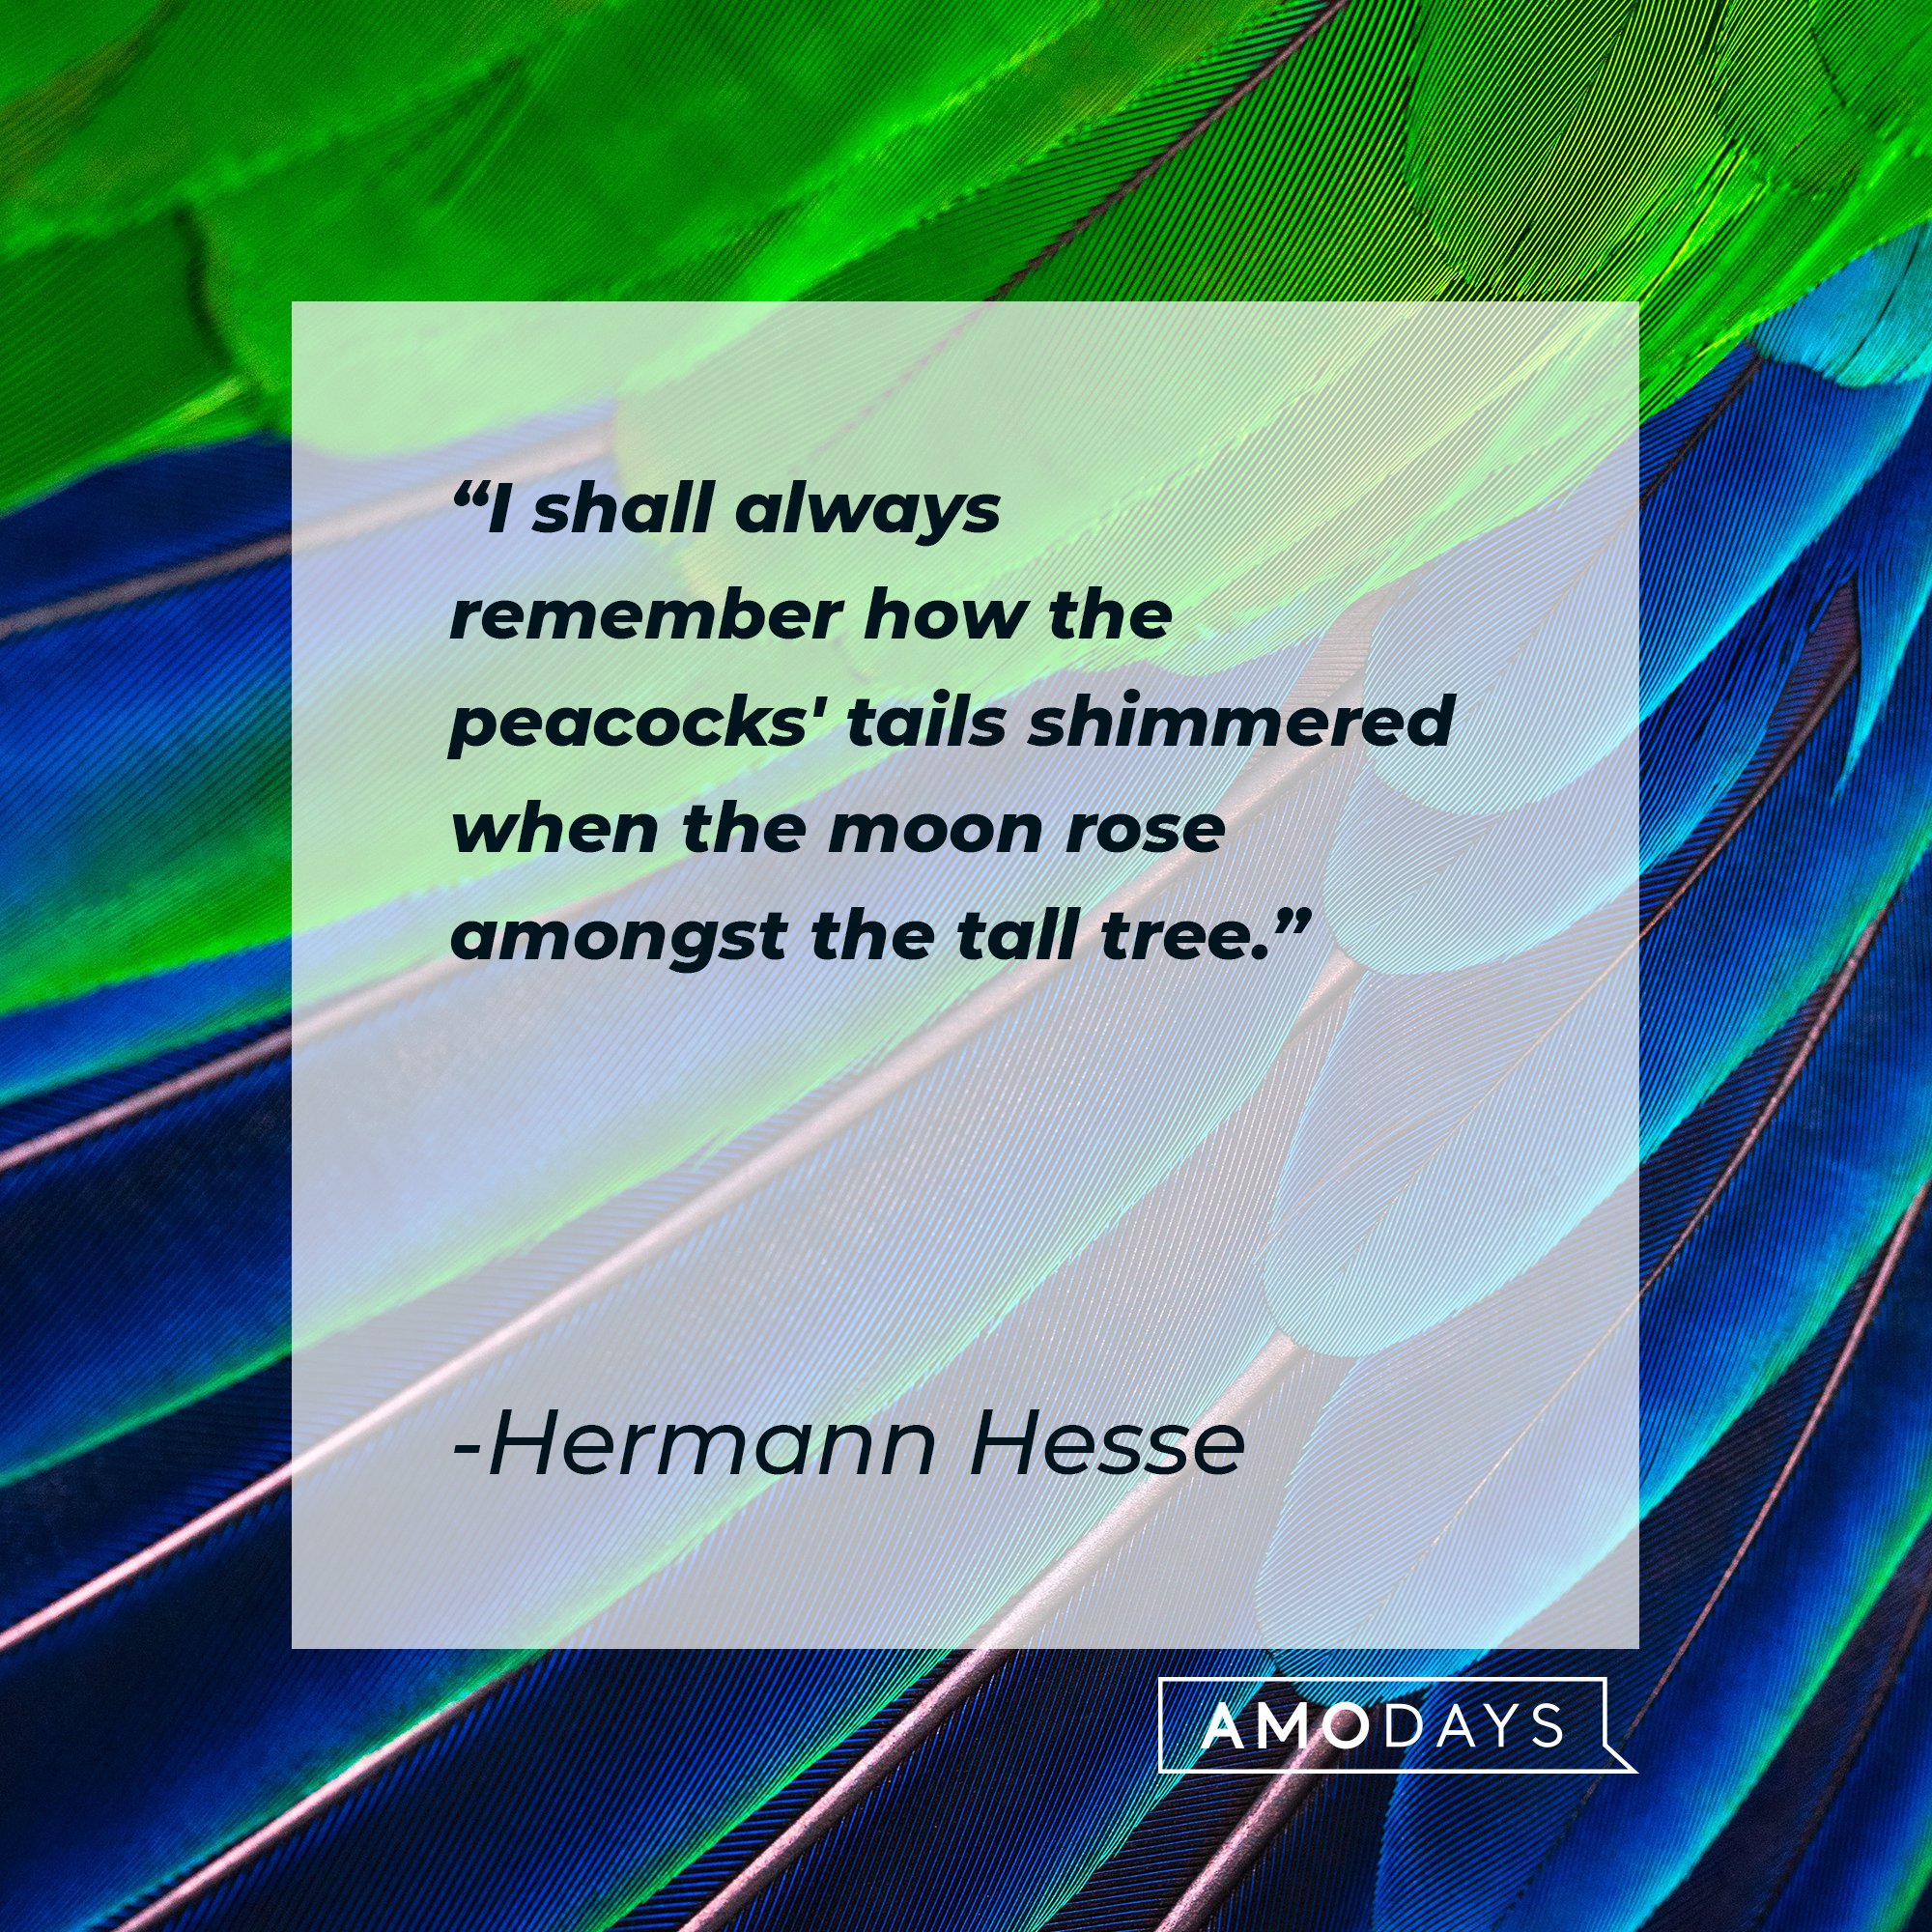 Hermann Hesse’s quote: "I shall always remember how the peacocks' tails shimmered when the moon rose amongst the tall tree." | Image: AmoDays